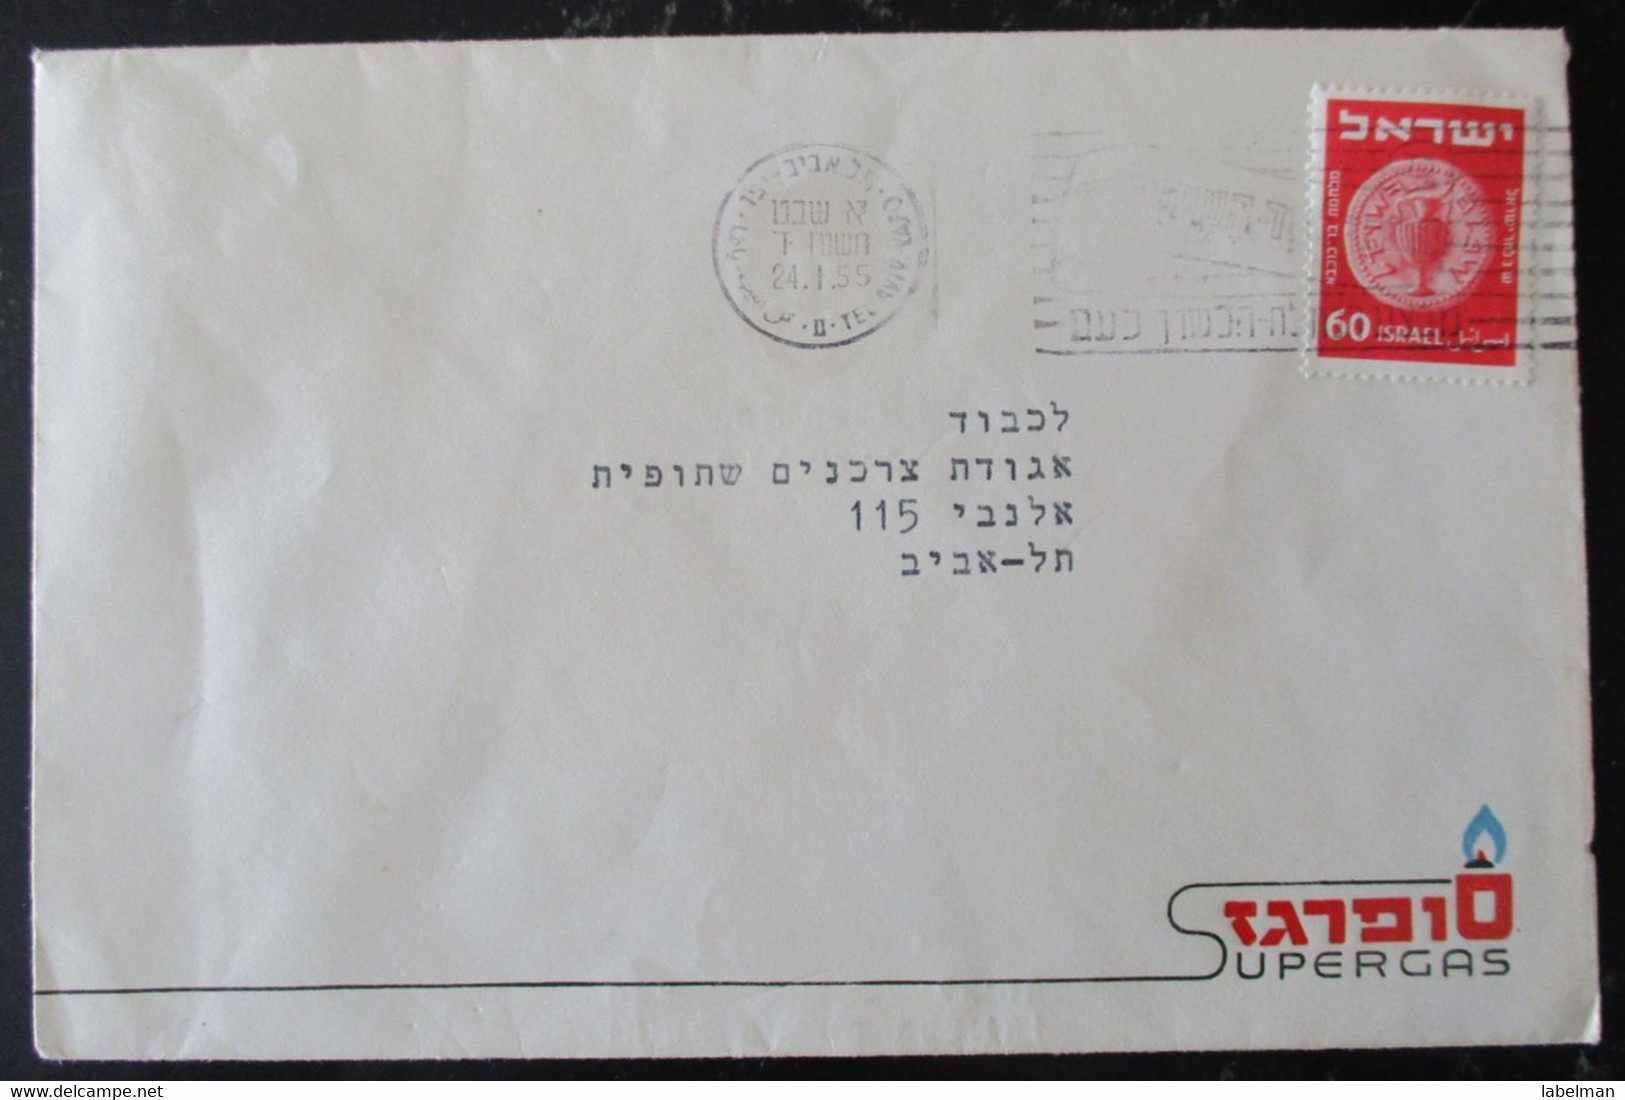 1955 EVENT POO FDC PC POST OFFICE TEL AVIV JAFFA SUPERGAS SUPER GAS CACHET COVER MAIL STAMP ENVELOPE ISRAEL JUDAICA - Other & Unclassified